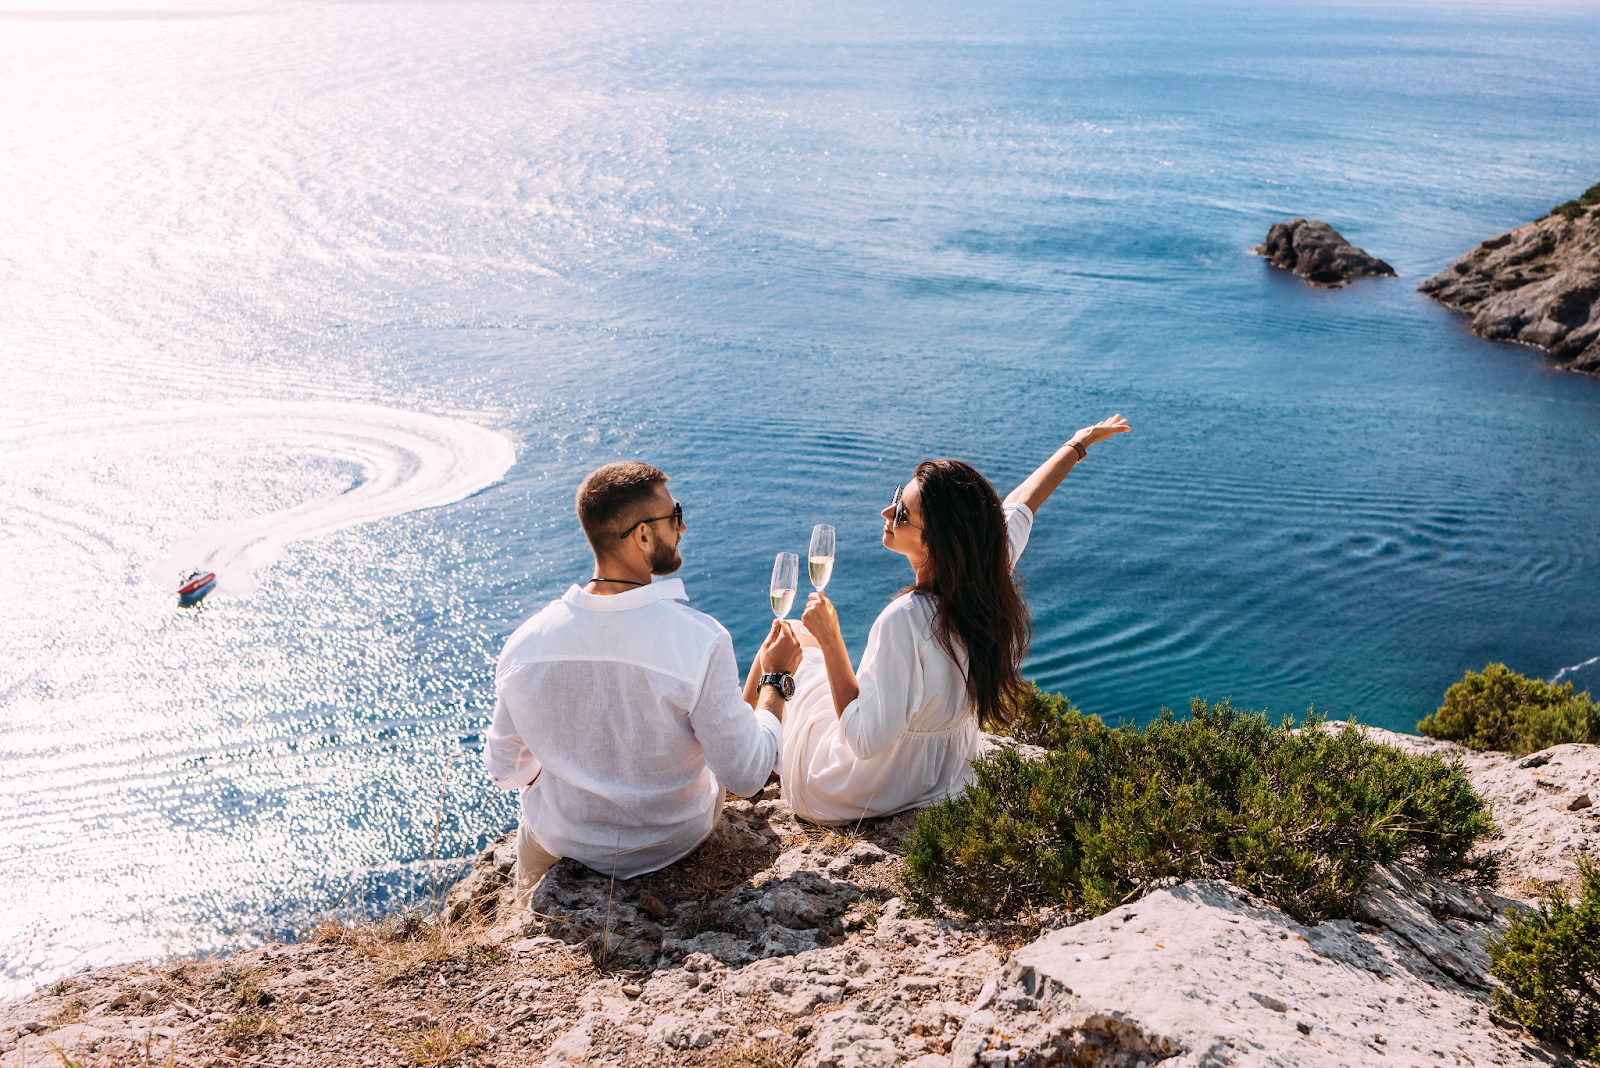 A man and woman happily sitting on a cliff overlooking the ocean drinking champagne for their honeymoon for the bella mansions wedding venue blog